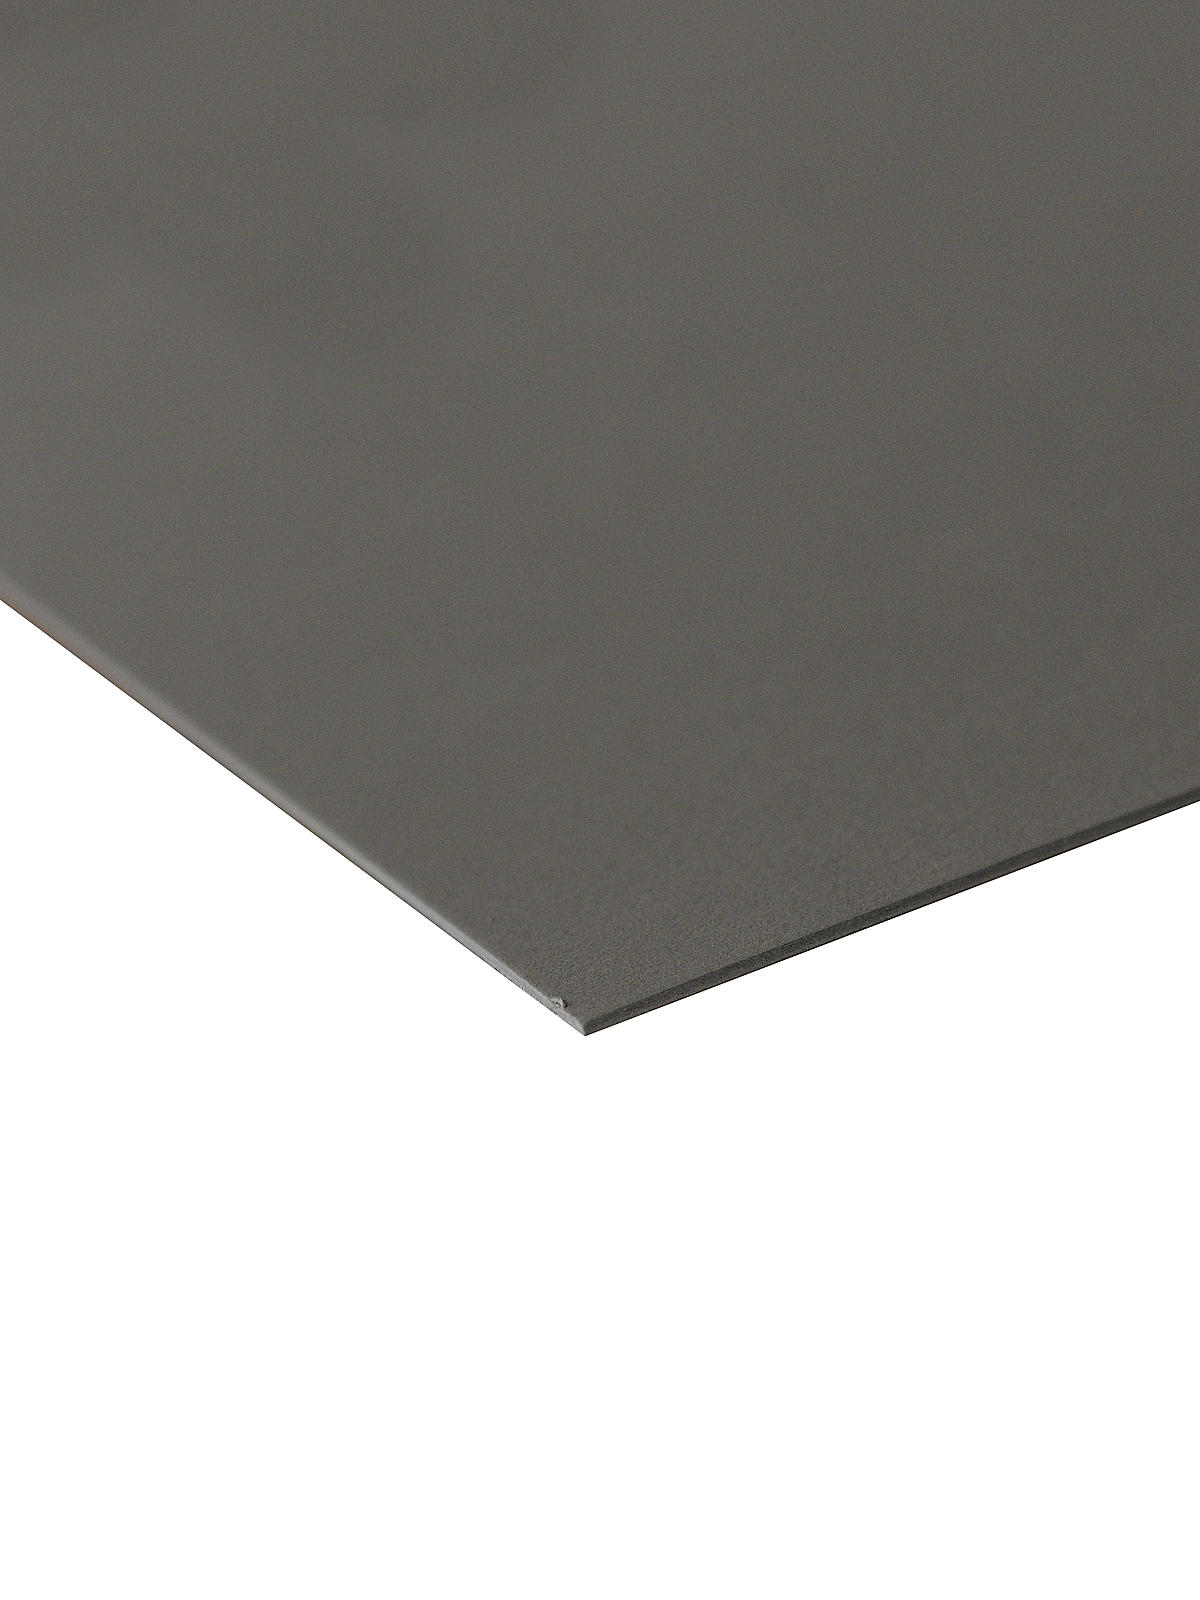 Museum Mounting Board Acid Free Gray 4 Ply Each